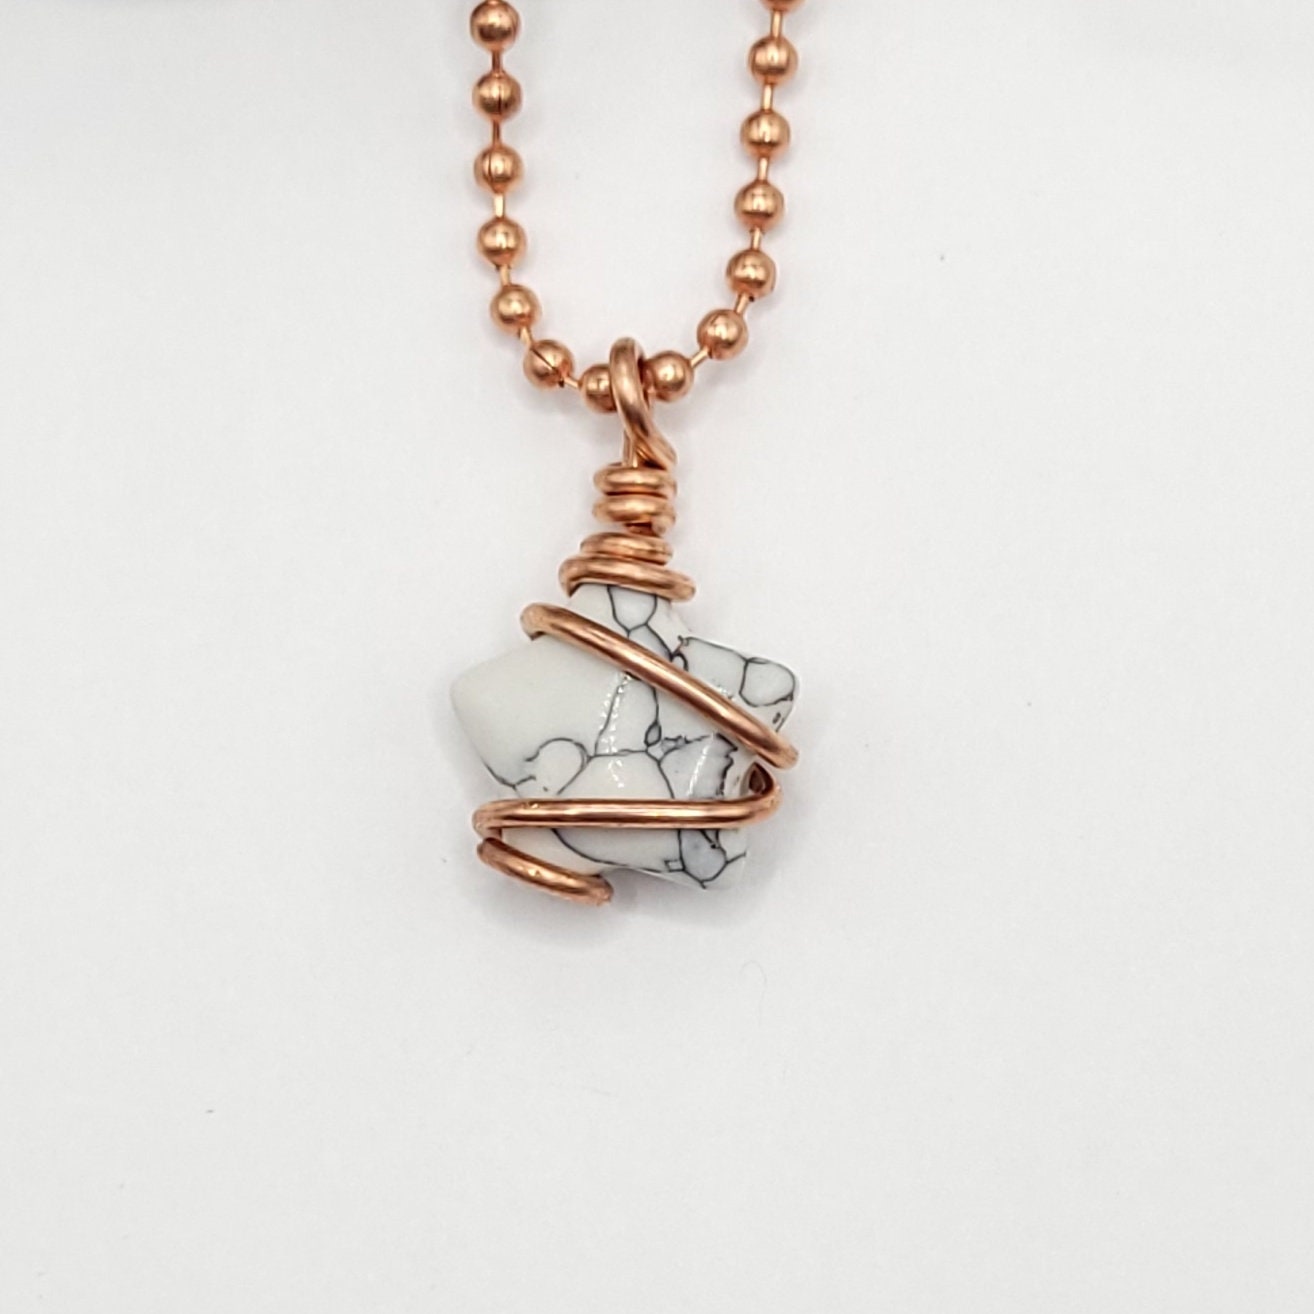 Howlite Star Necklace, Copper Wire Wrapped Howlite Star Pendant, Howlite Crystal